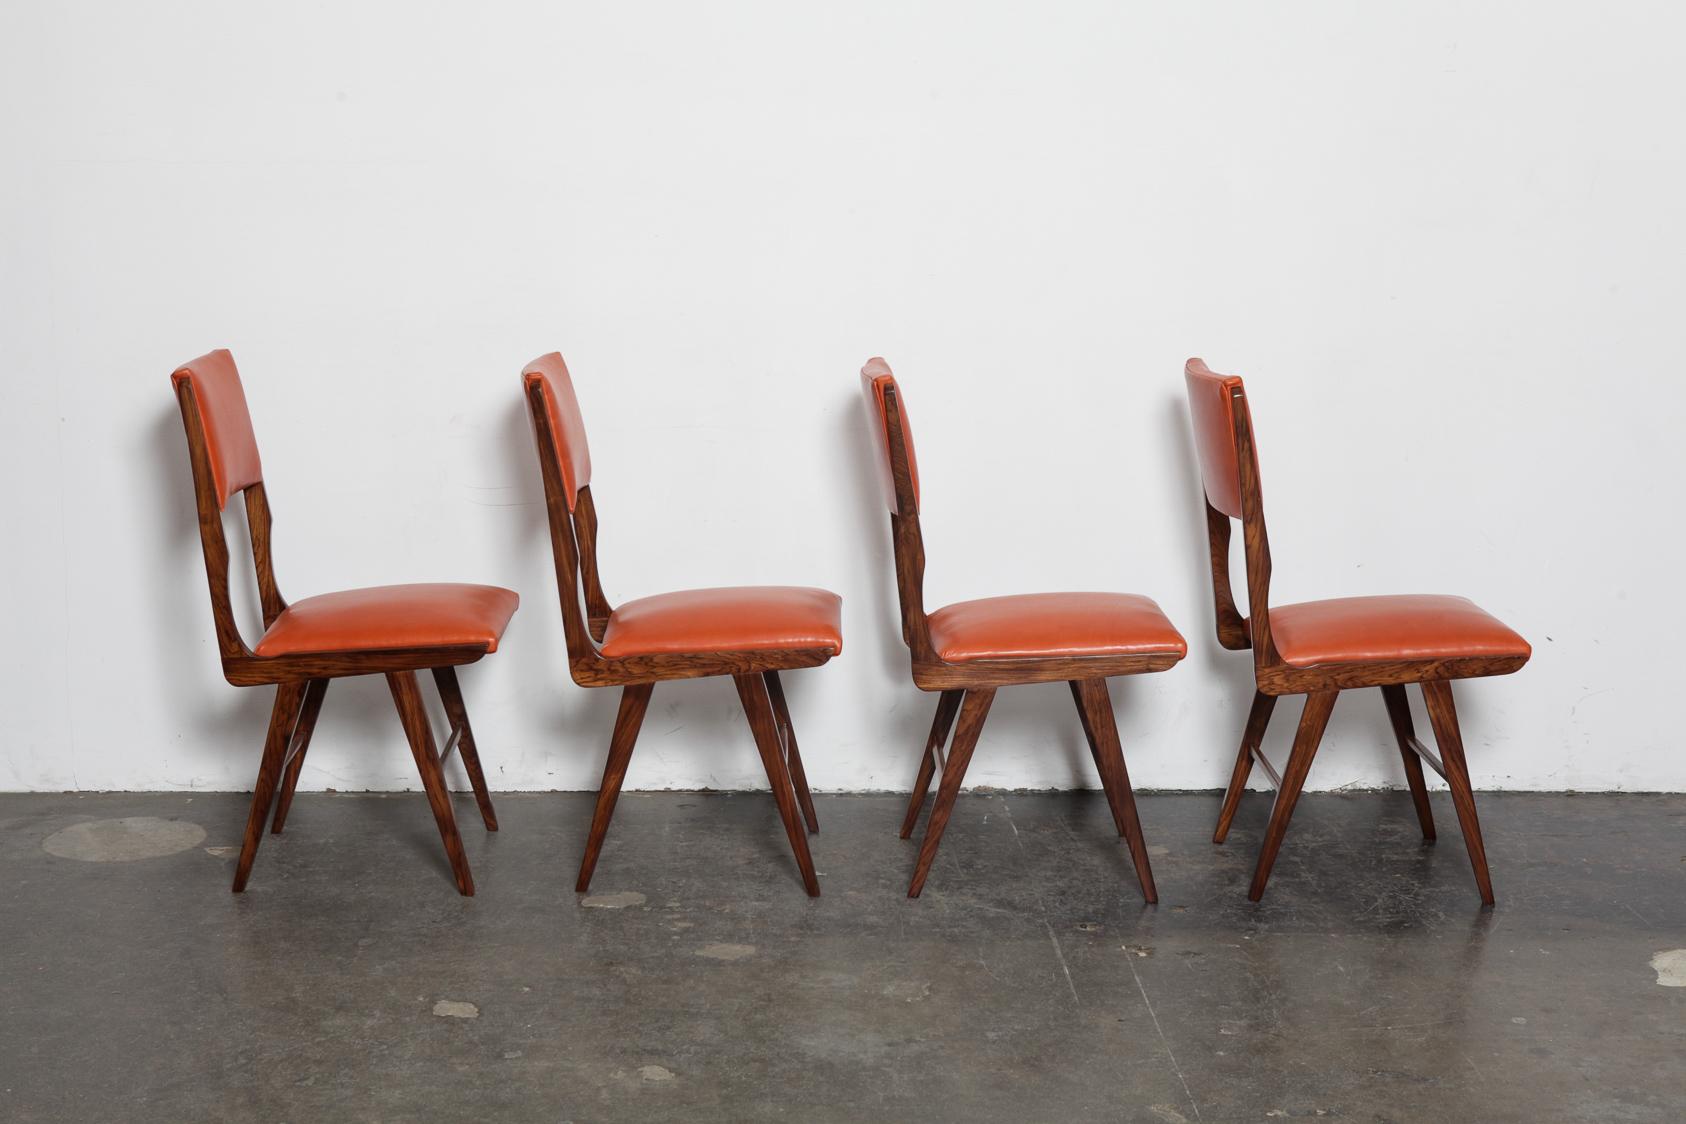 Set of 8 tall back beautiful vintage Brazilian solid rosewood dining chairs, newly upholstered in a burnt orange leather and refinished in lacquer, 1960s Brazil. Designer unknown.